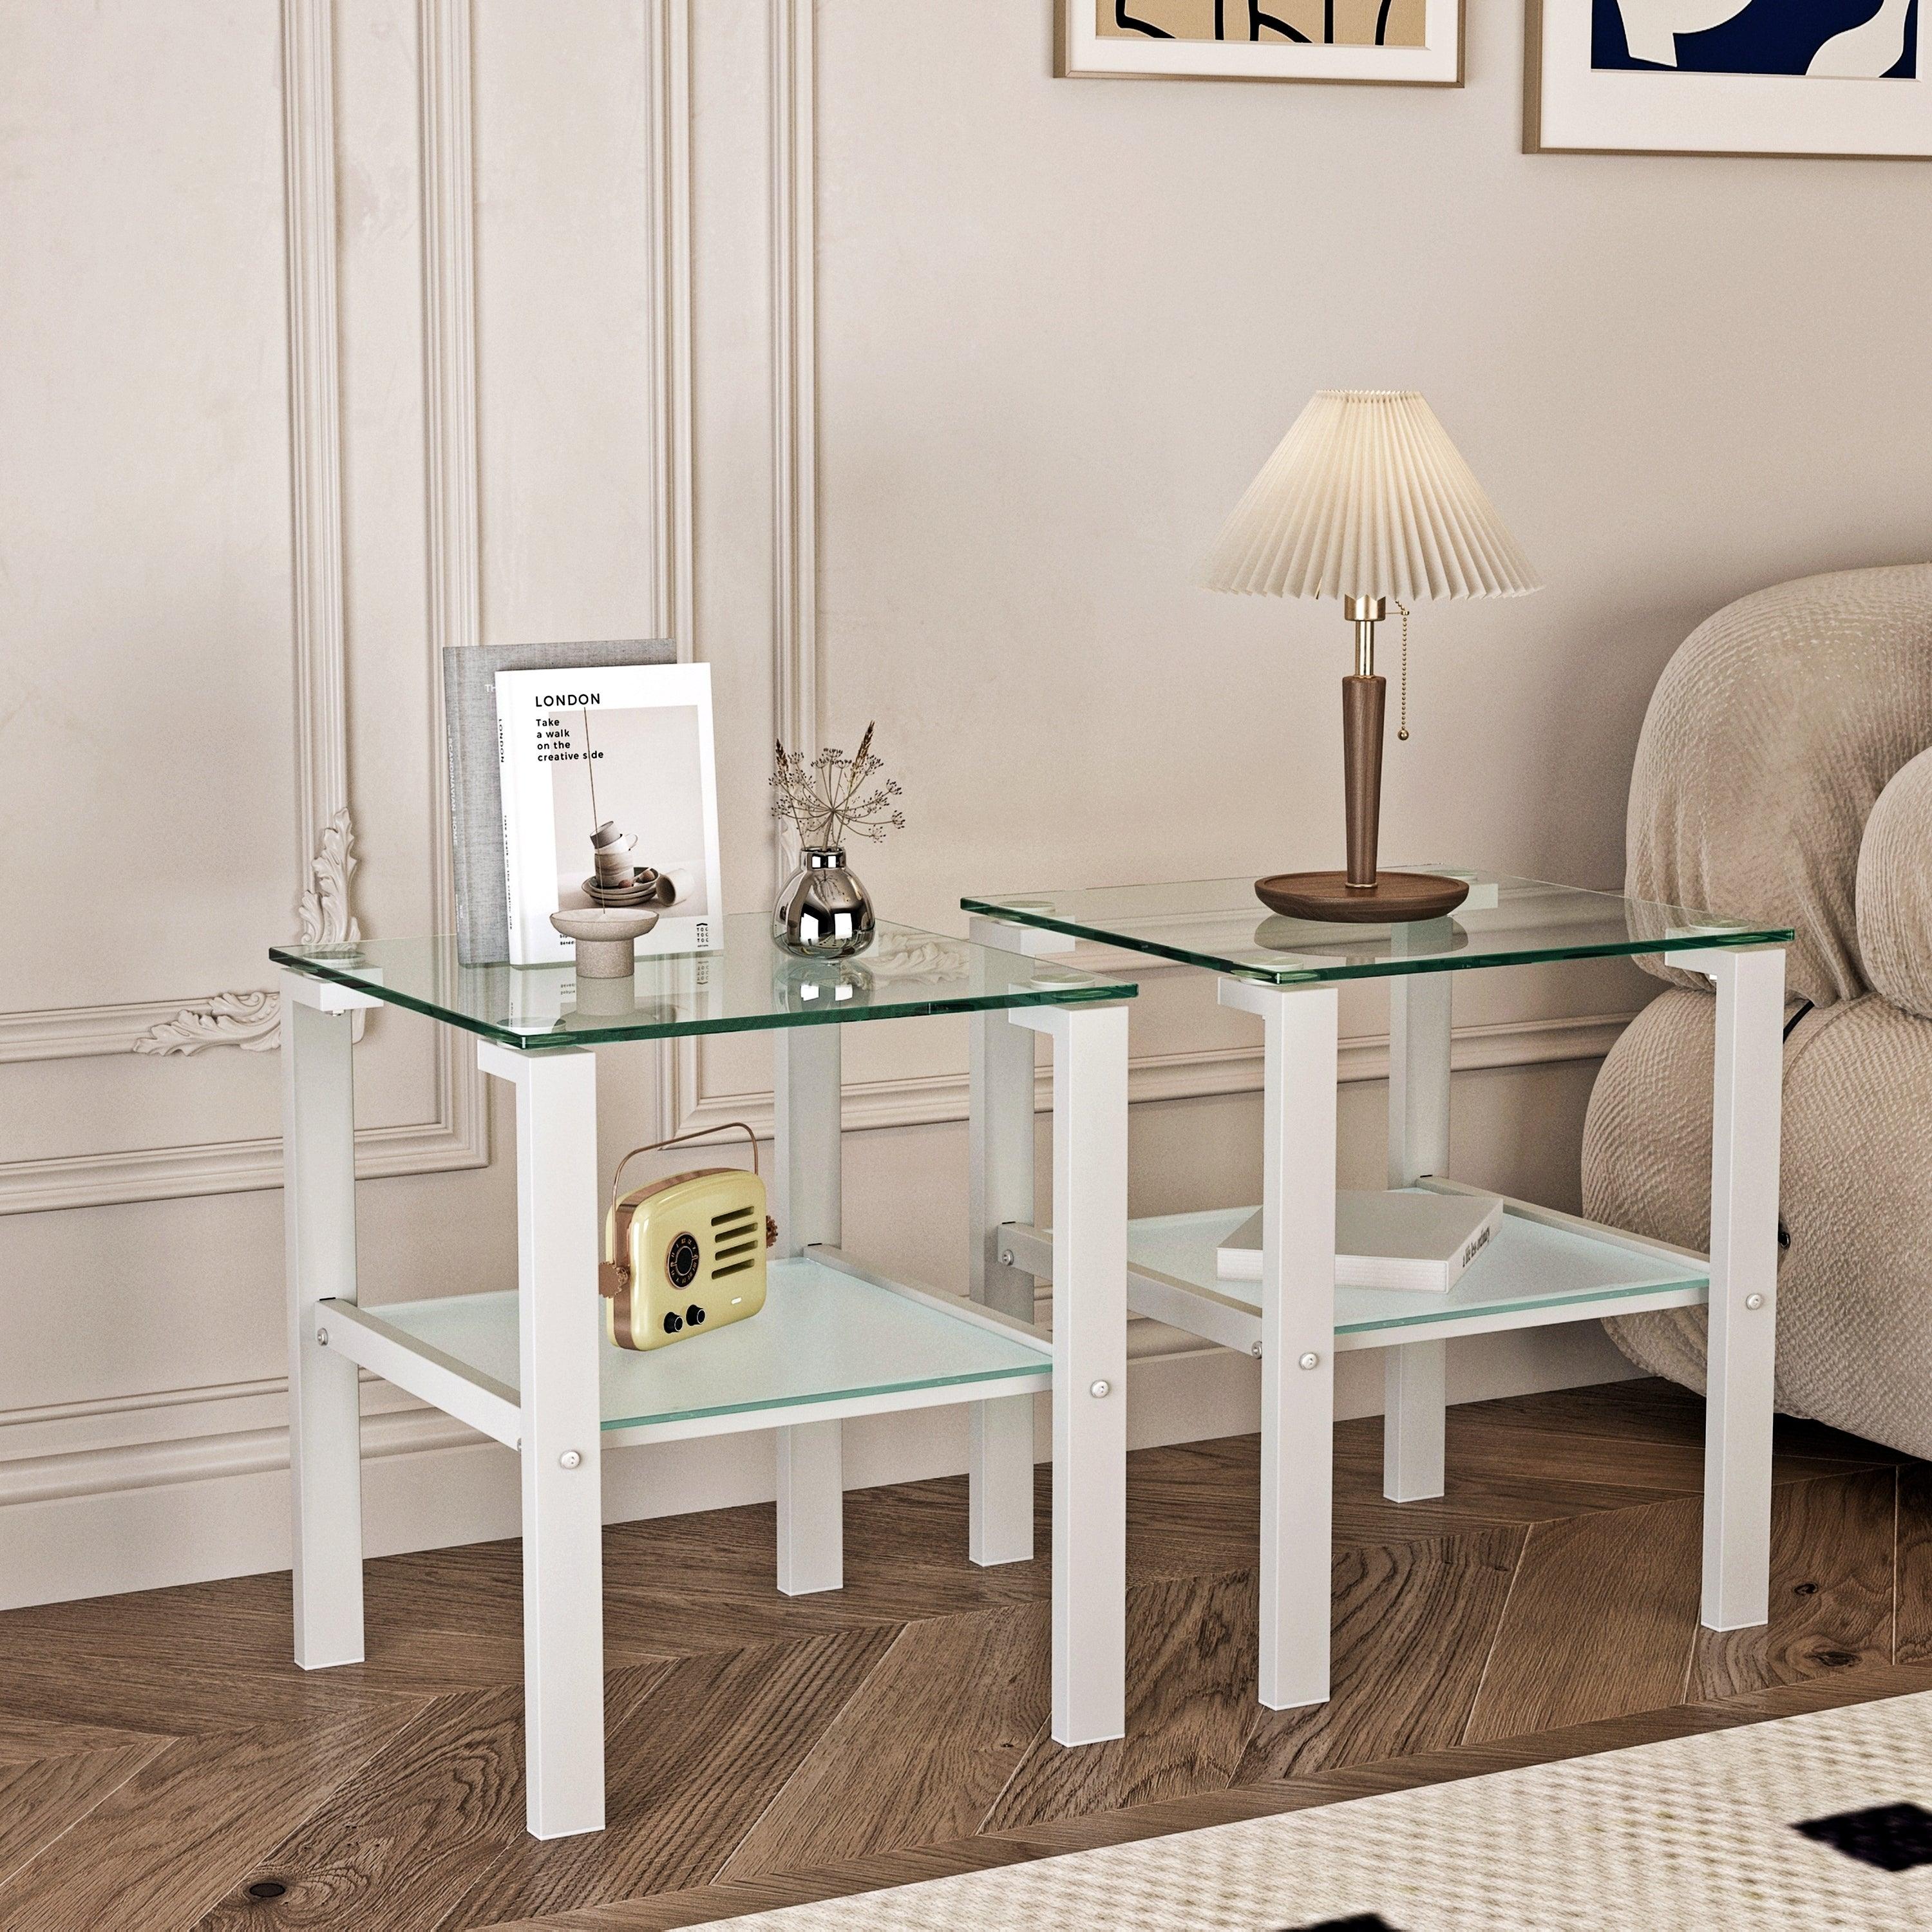 🆓🚛 Set Of 2, Glass Two Layer Tea Table, Small Round Table, Bedroom Corner Table, Living Room Side Table, White